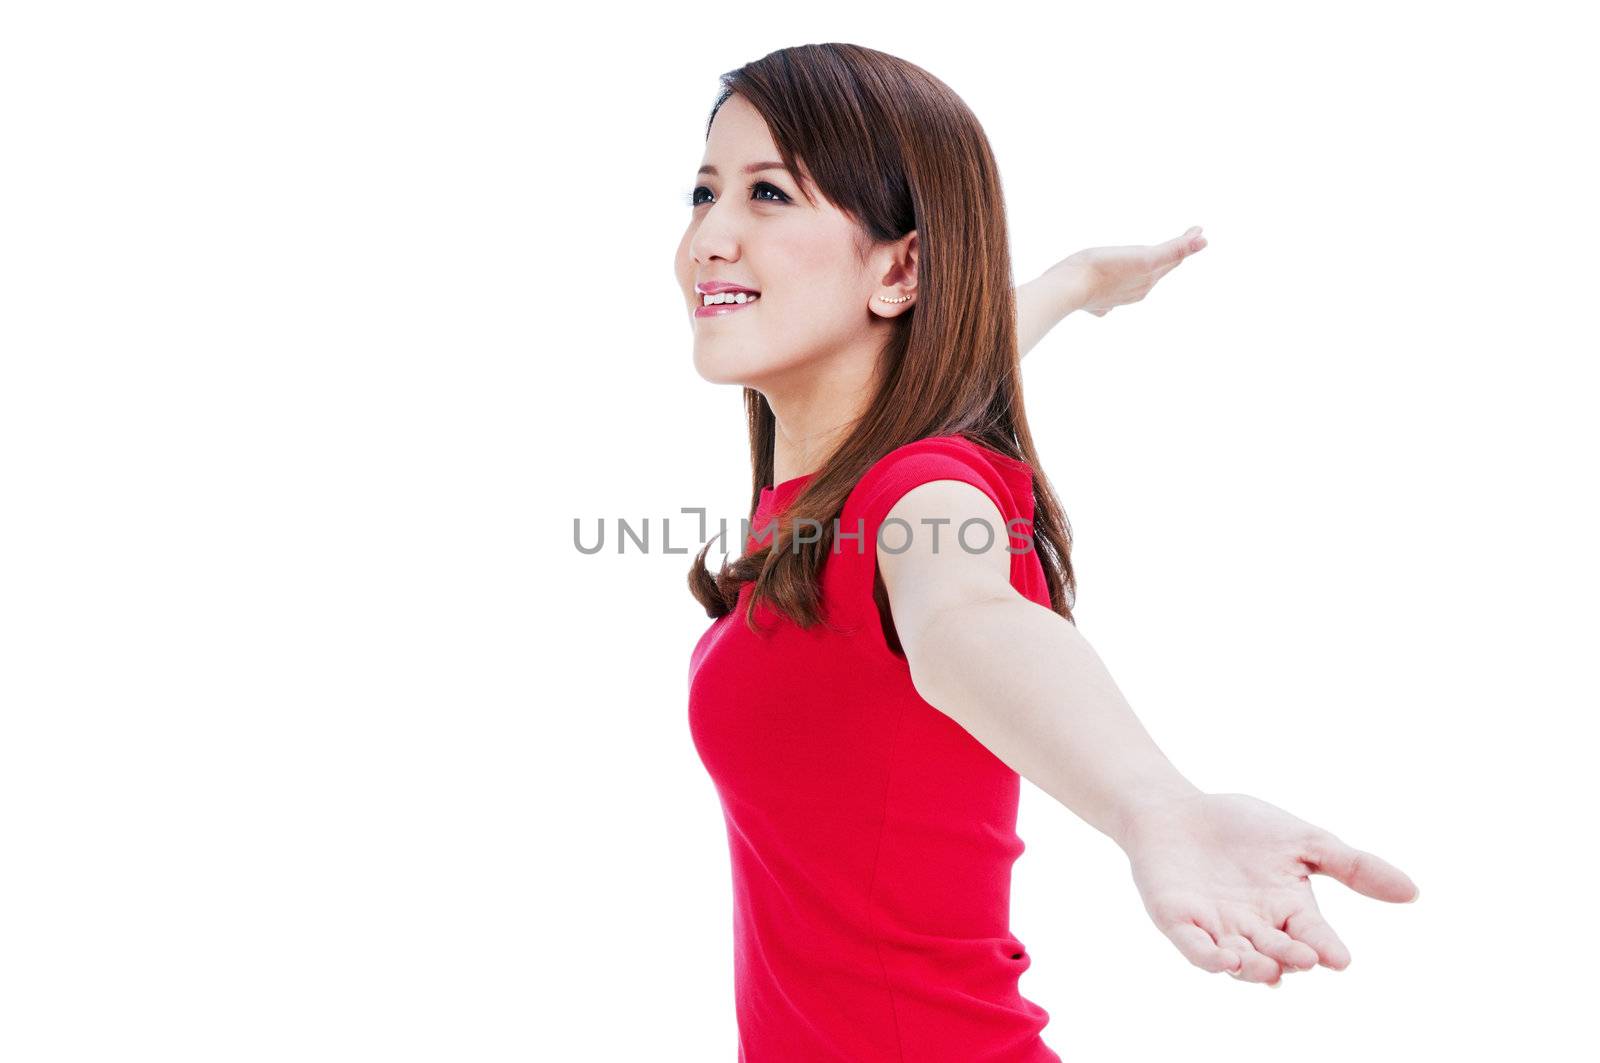 Portrait of a beautiful young woman stretching out her hands, isolated on white background.